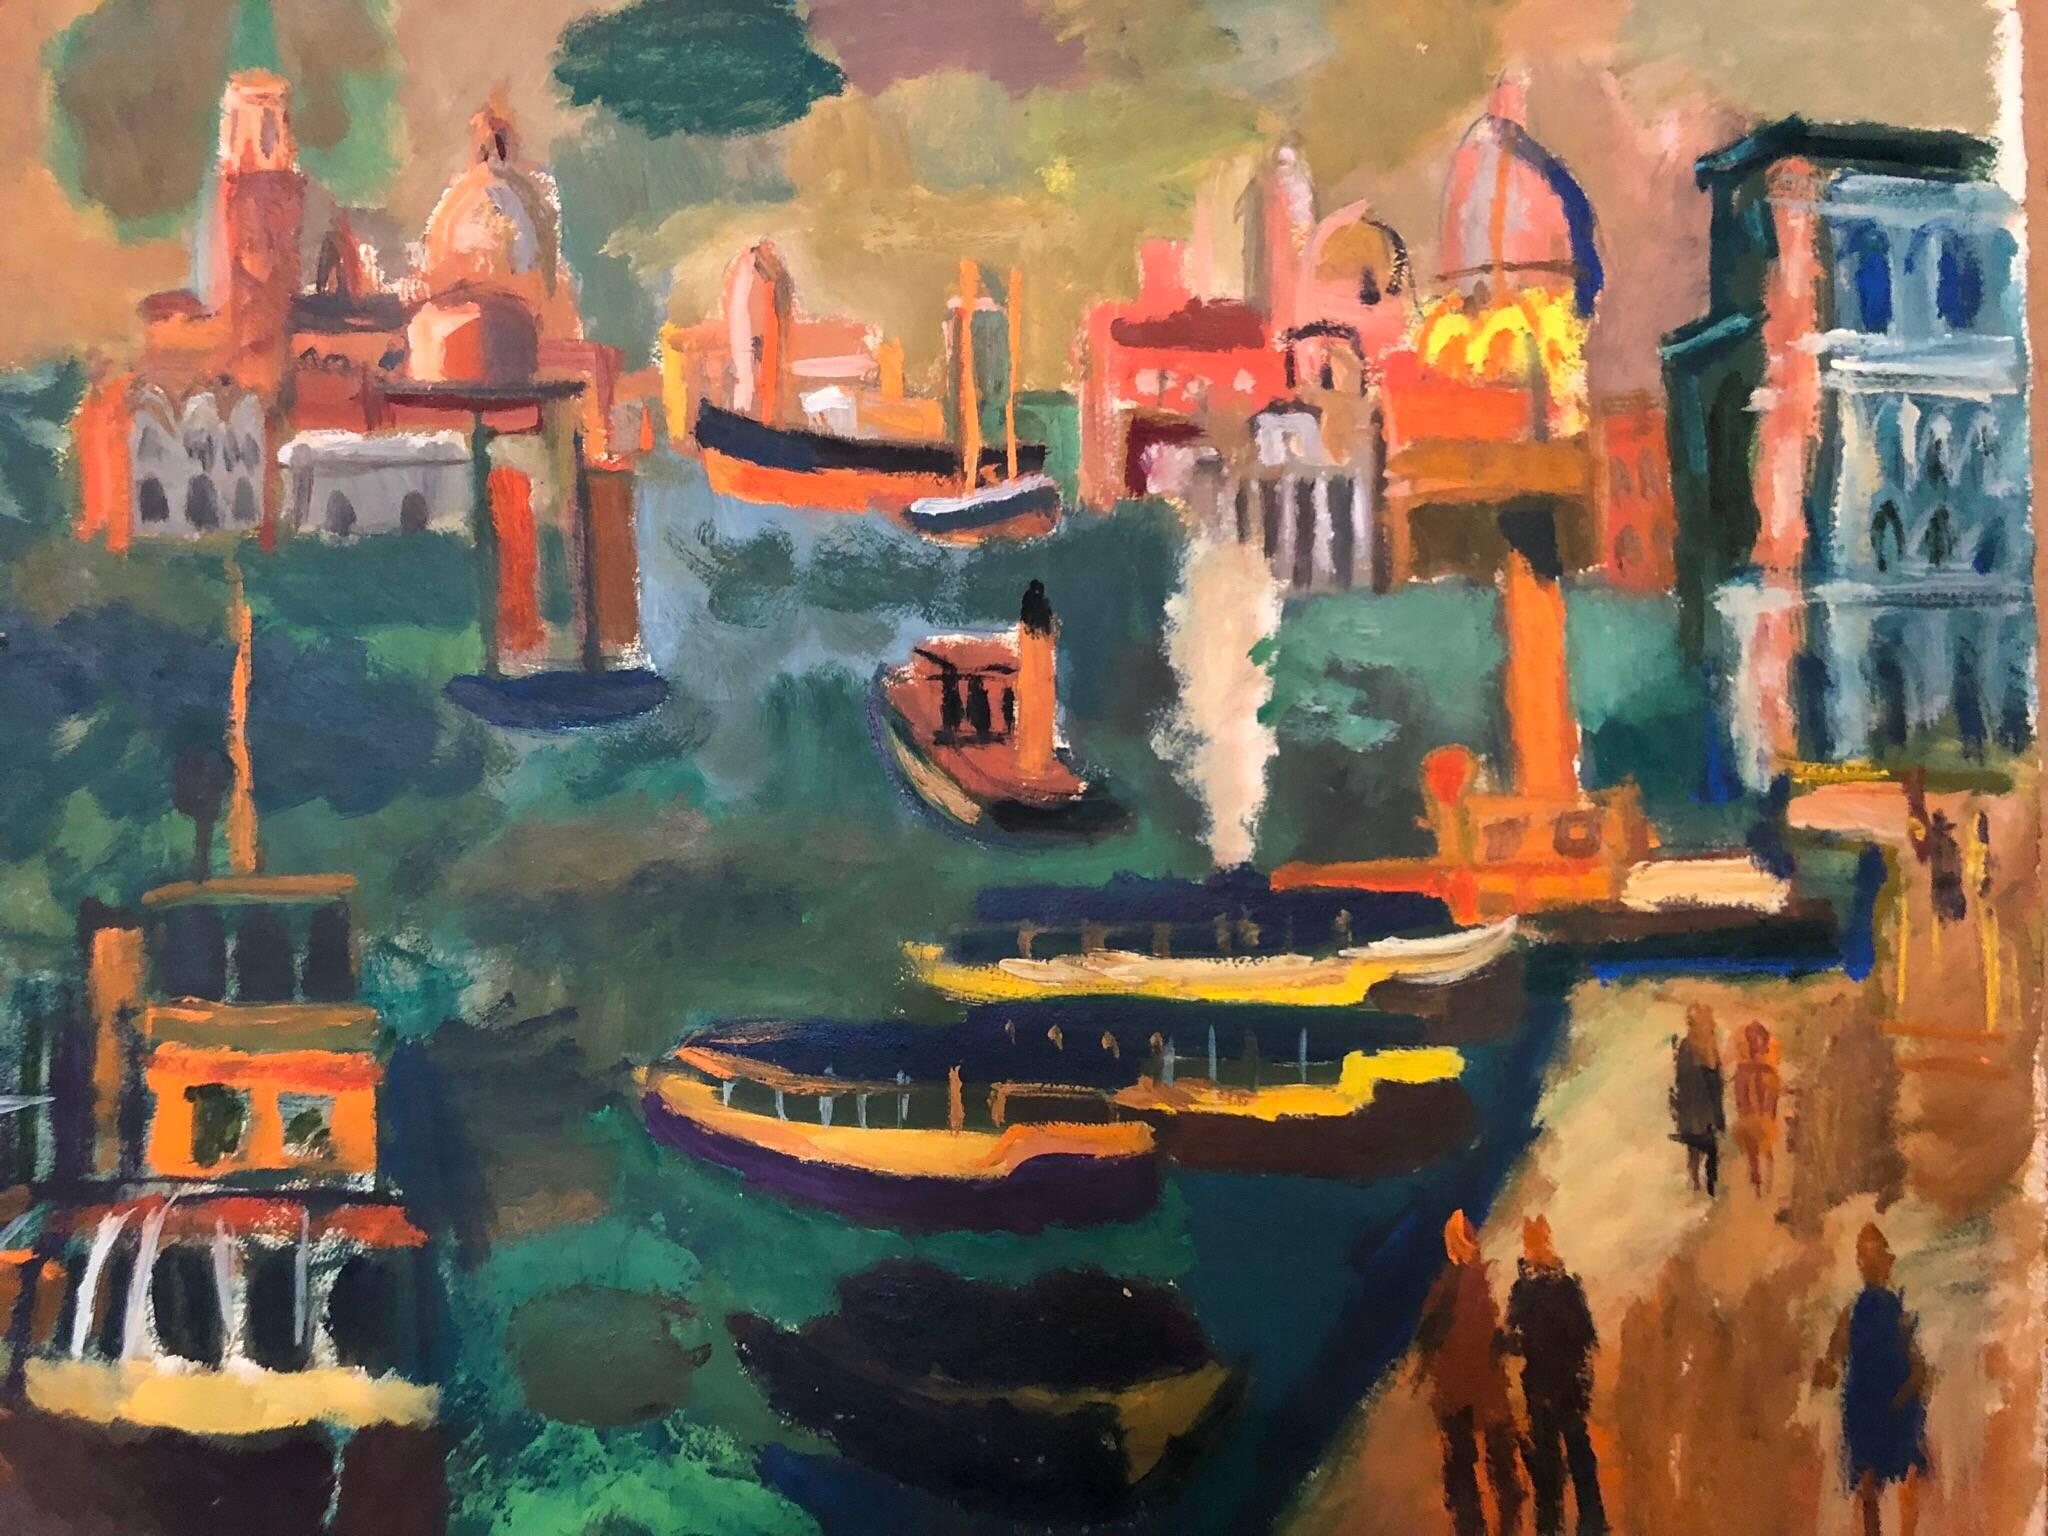 Venice, Italy Panorama American Modernist Oil Painting Chicago Artist. 2 Sided - Gray Figurative Painting by Abbott Pattison